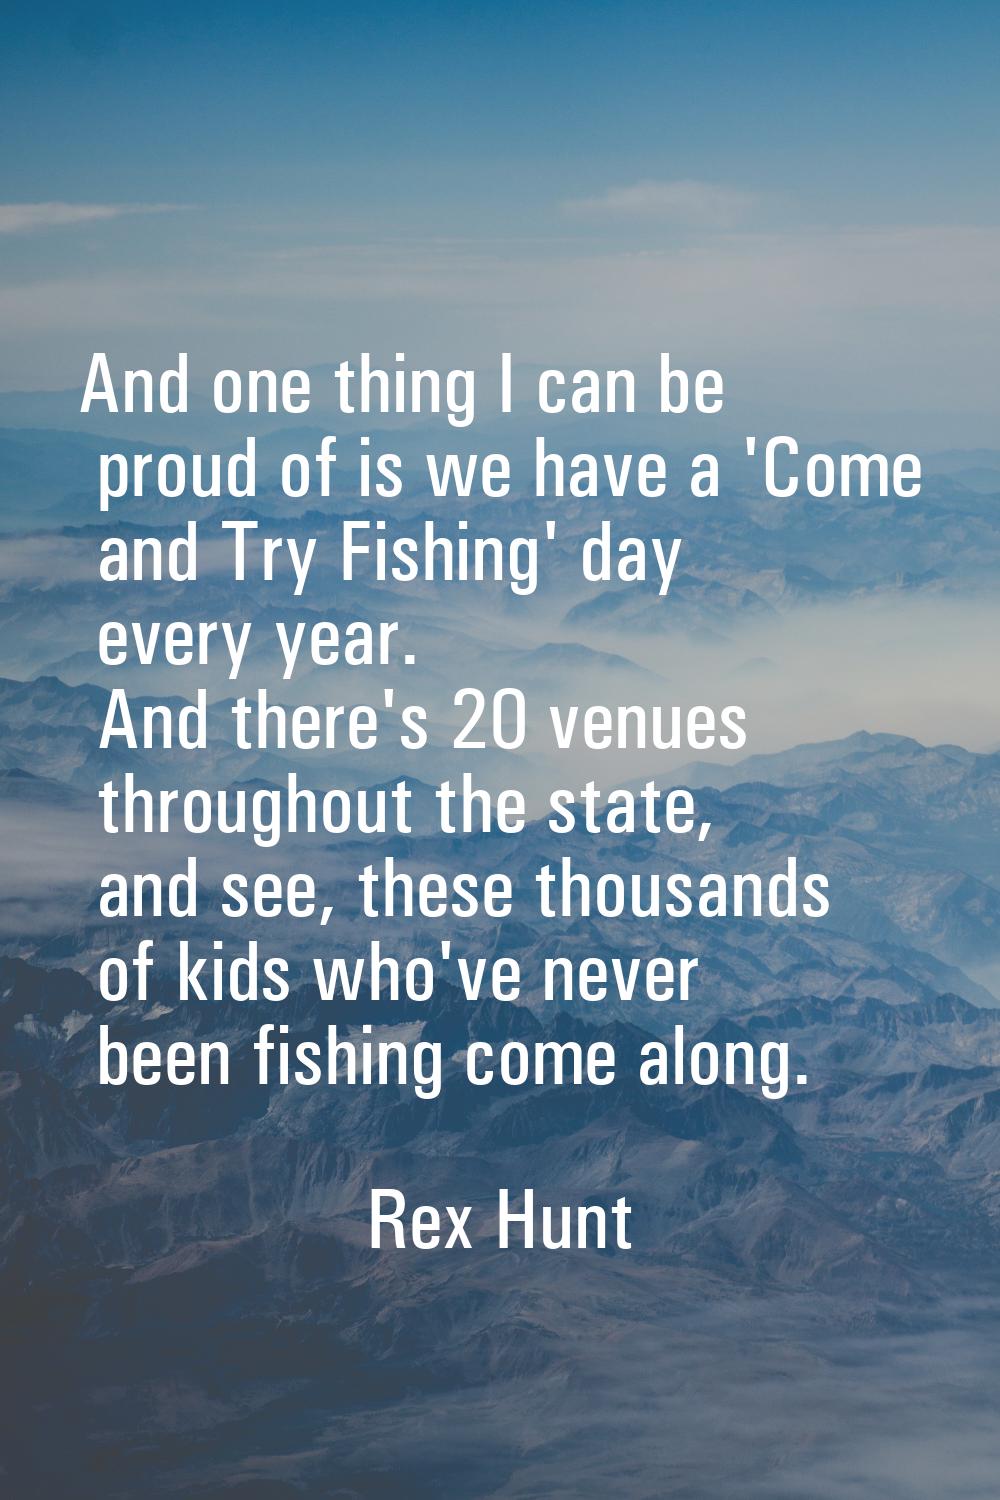 And one thing I can be proud of is we have a 'Come and Try Fishing' day every year. And there's 20 